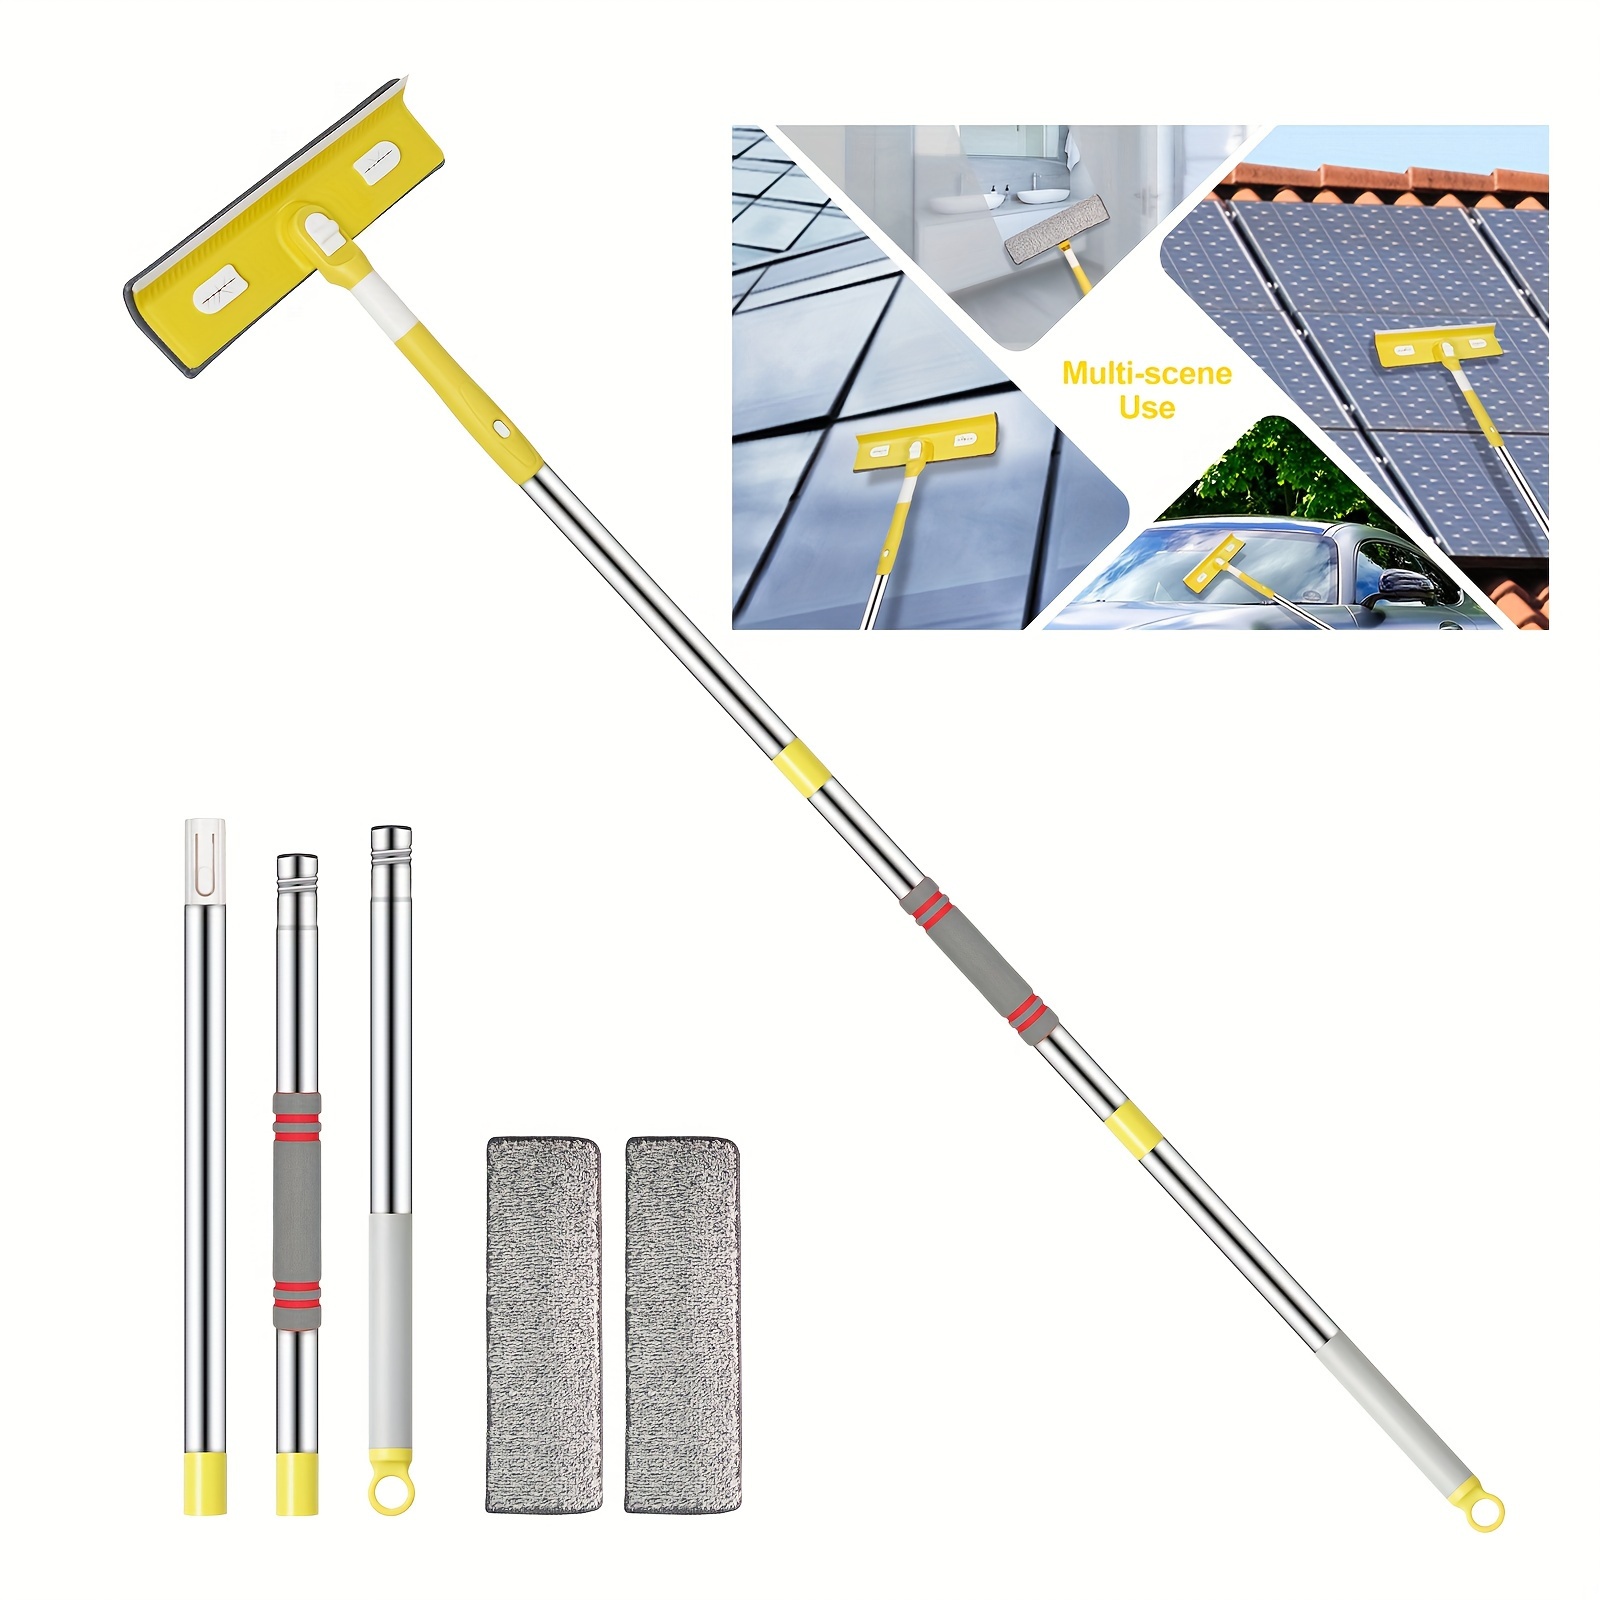 Exterior Window Cleaning Solutions, Pro Glass Cleaning Tools